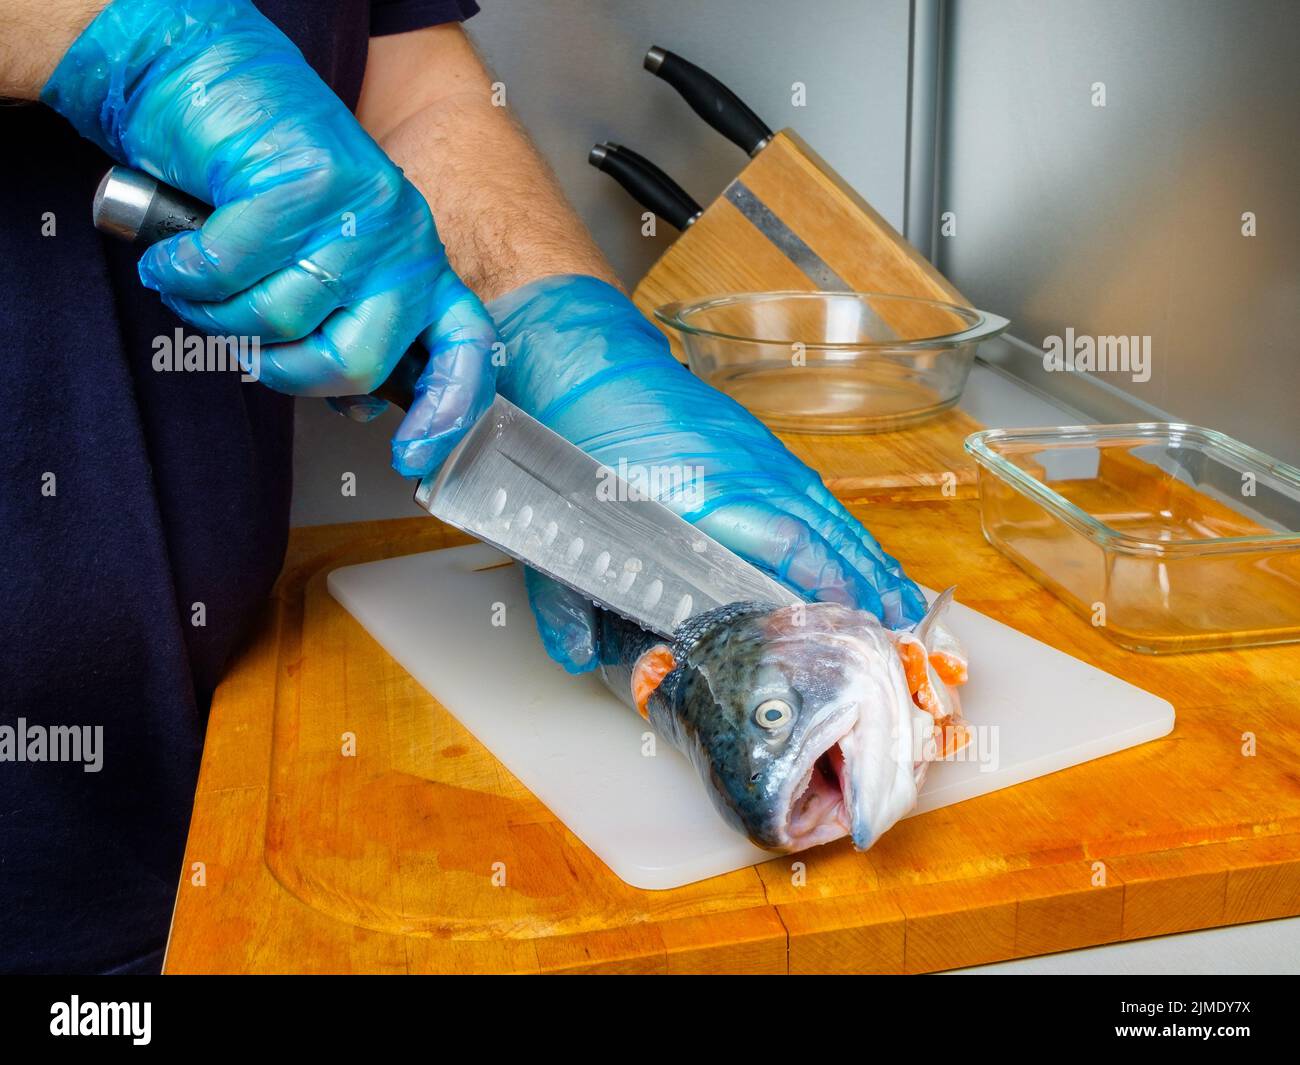 The gloved hands of the cook cut off the salmon's head with a knife. Stock Photo